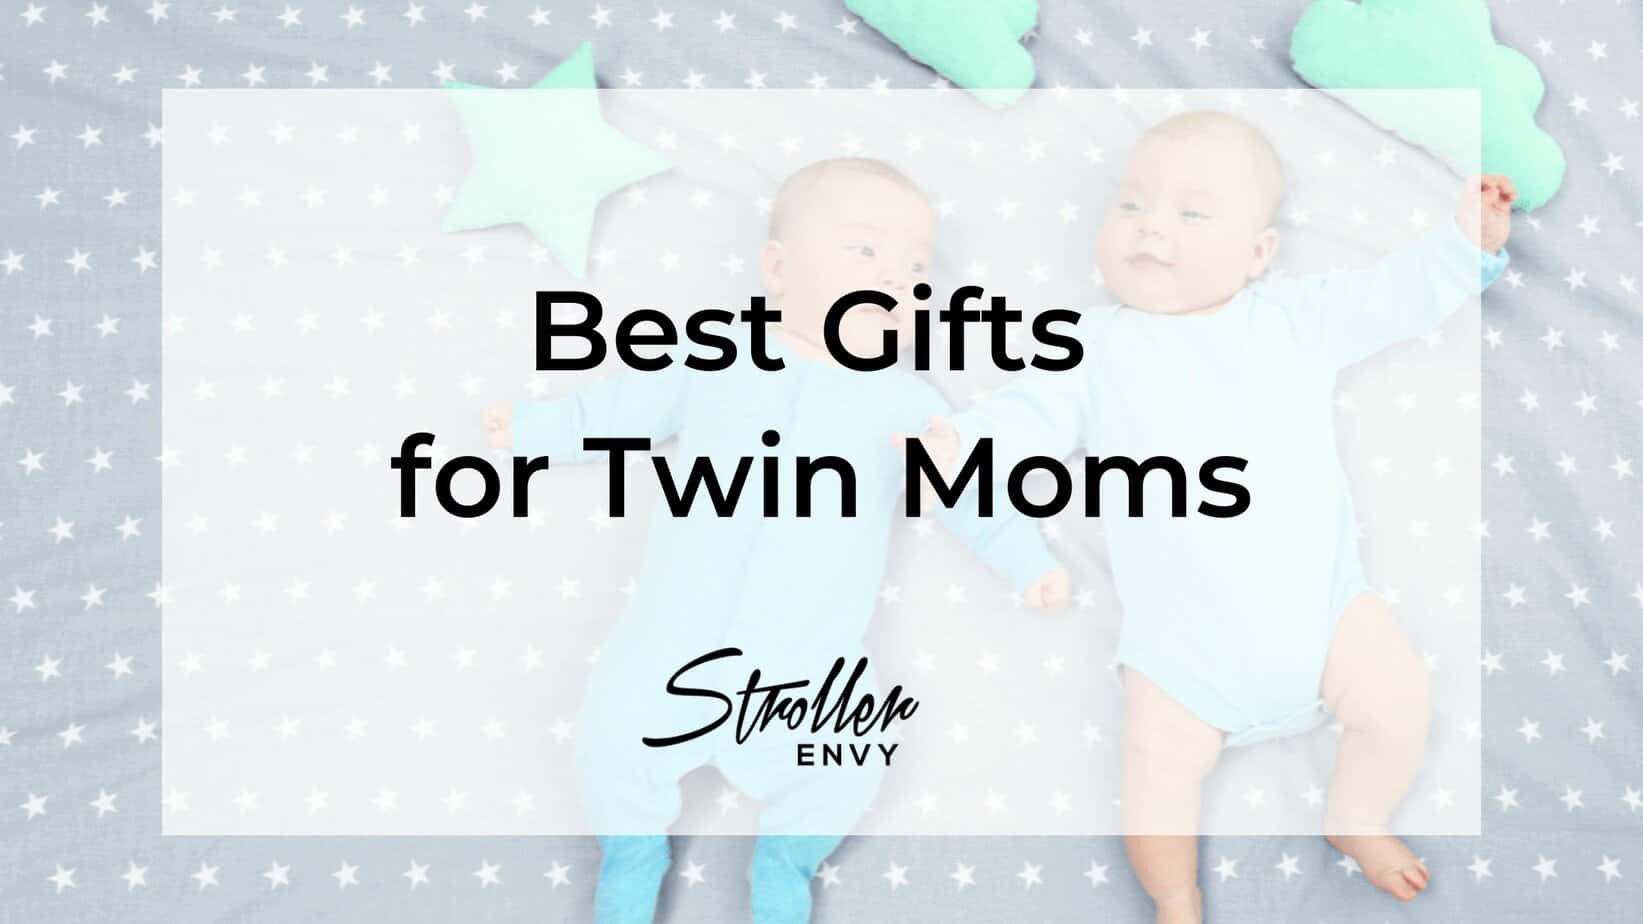 Best Gifts for Twin Moms